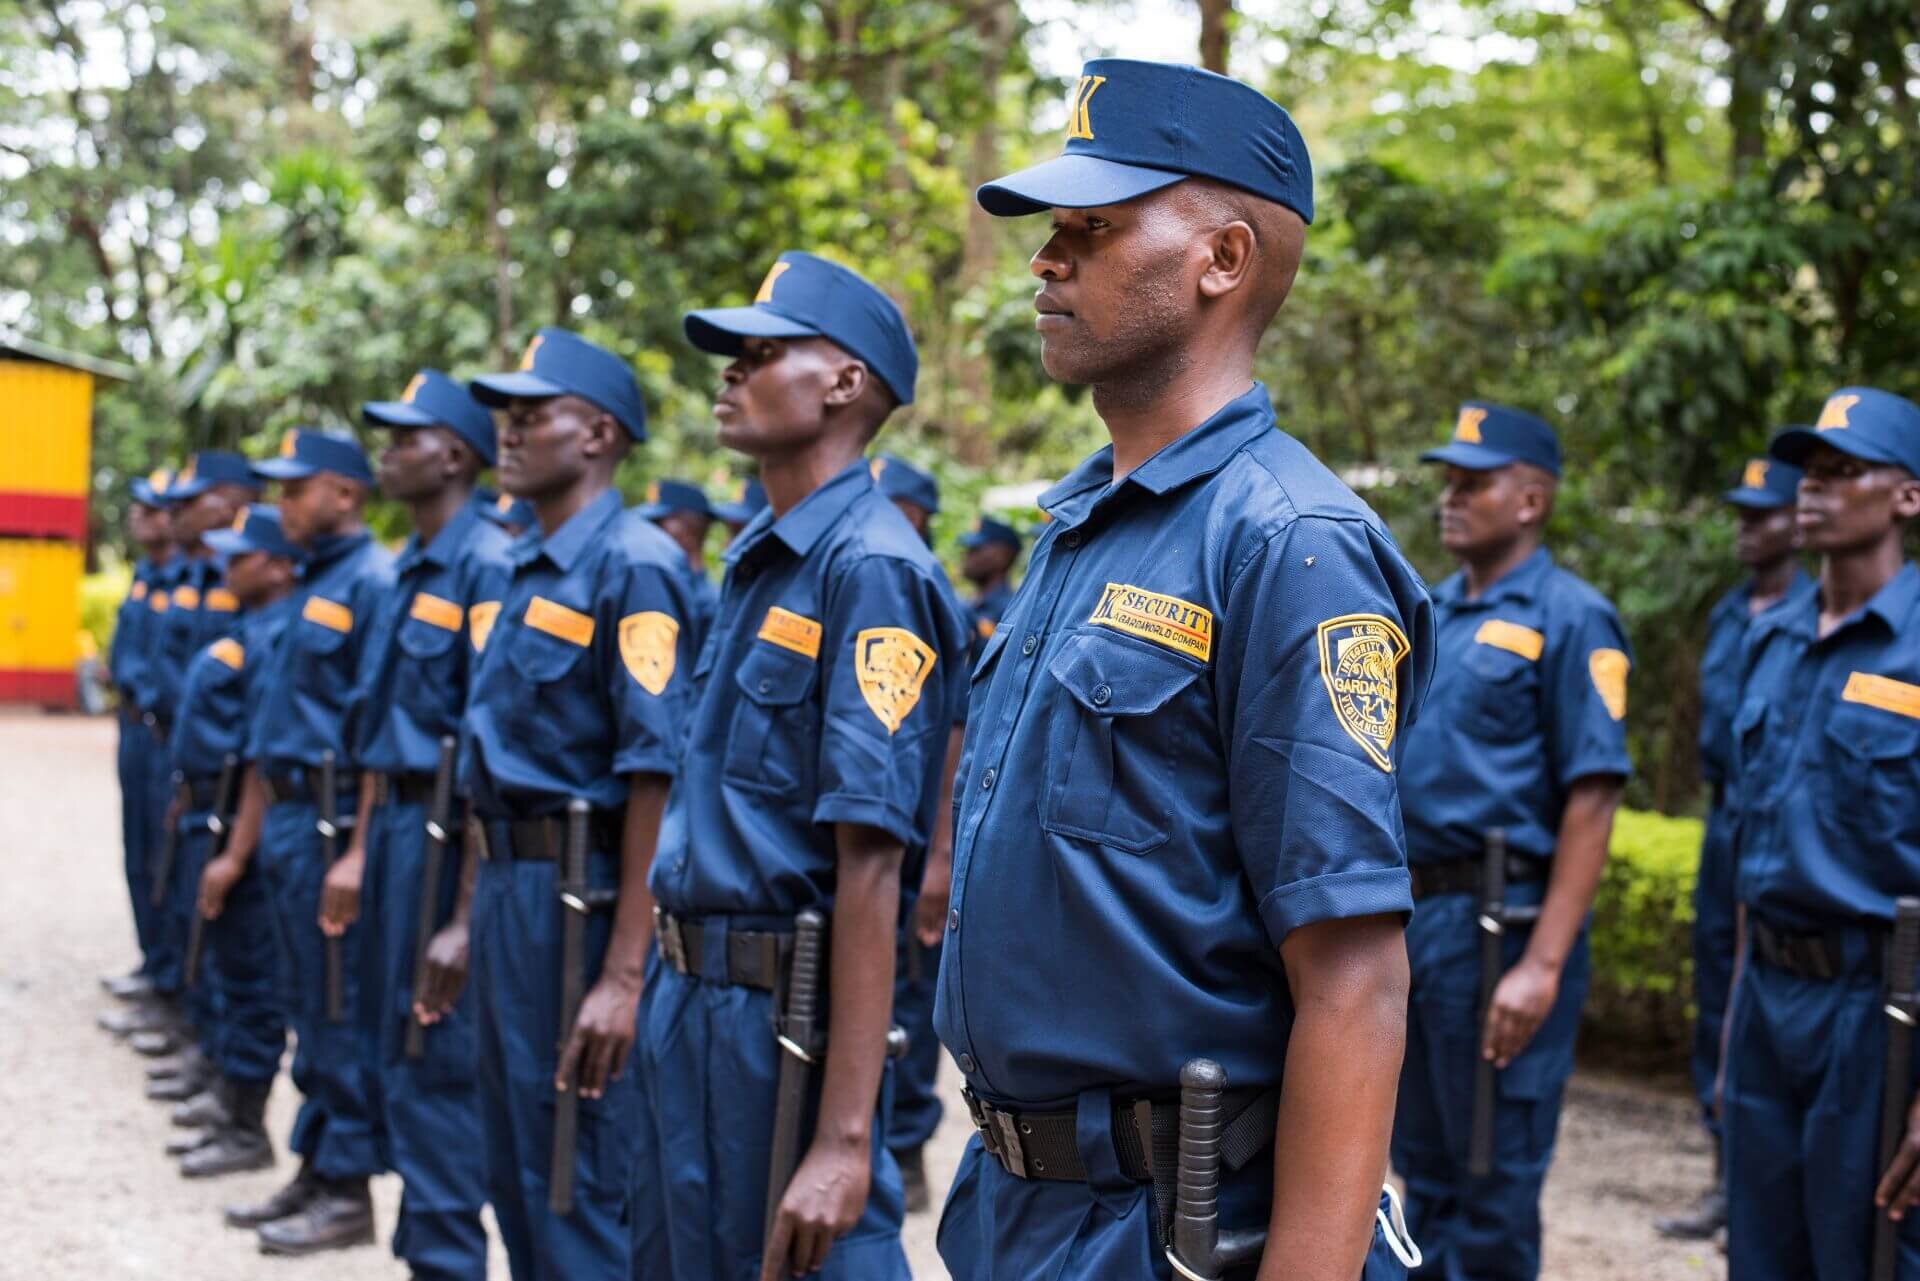 How to shop for the best Security Guard Uniforms Suppliers